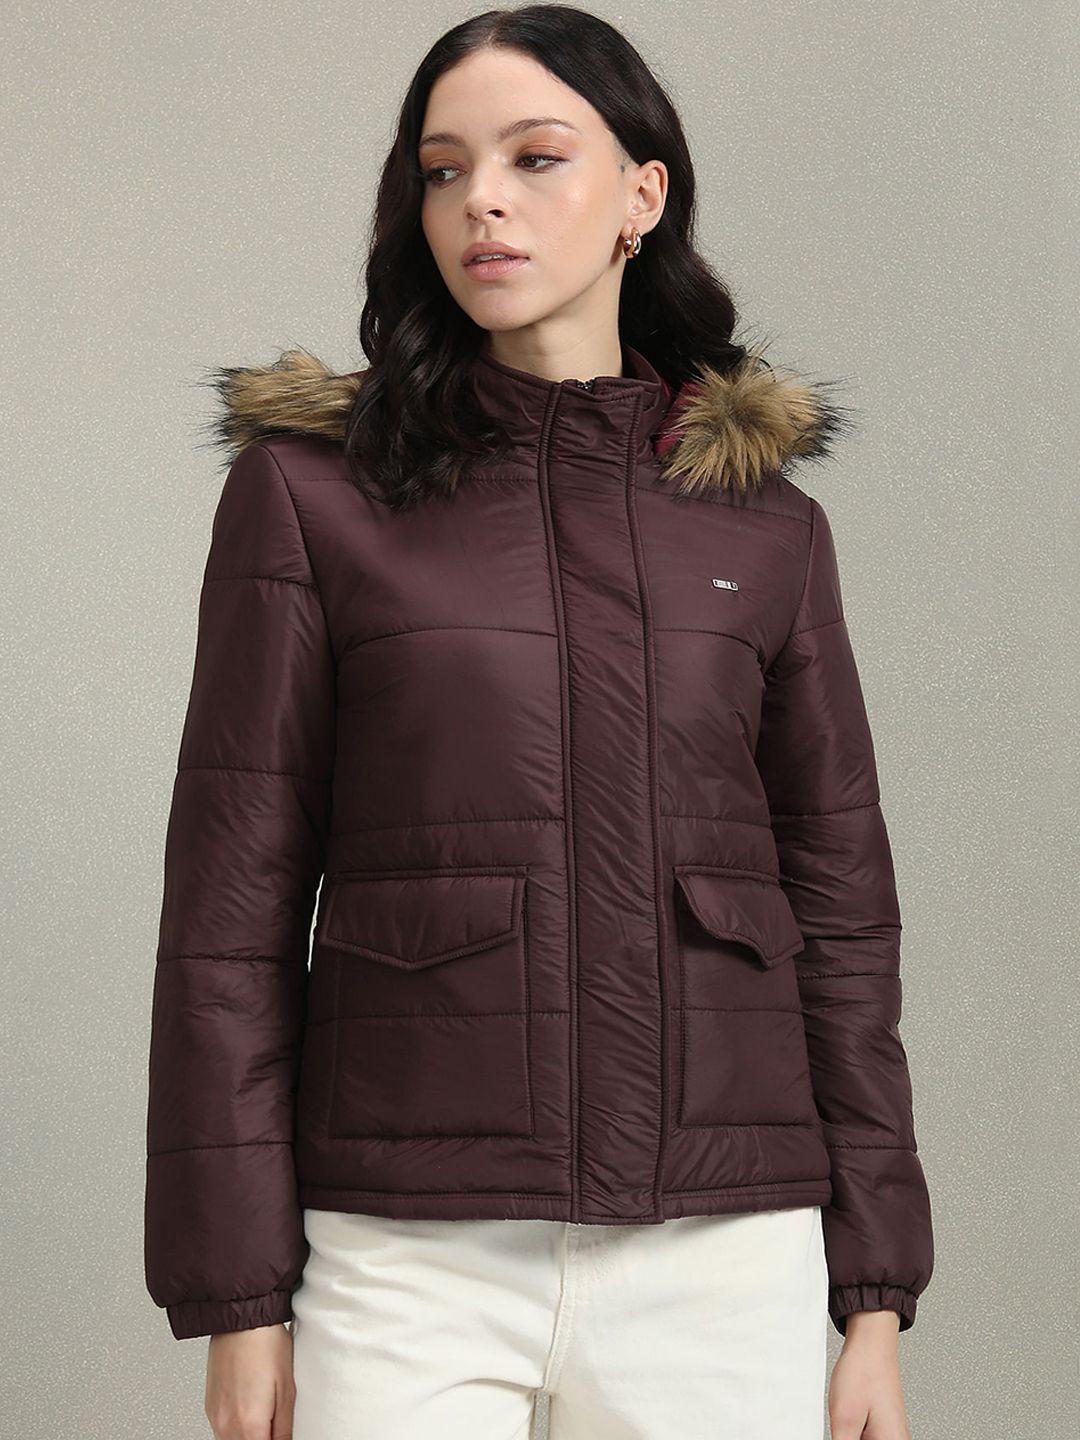 u.s. polo assn. women hooded quilted jacket with faux fur detail